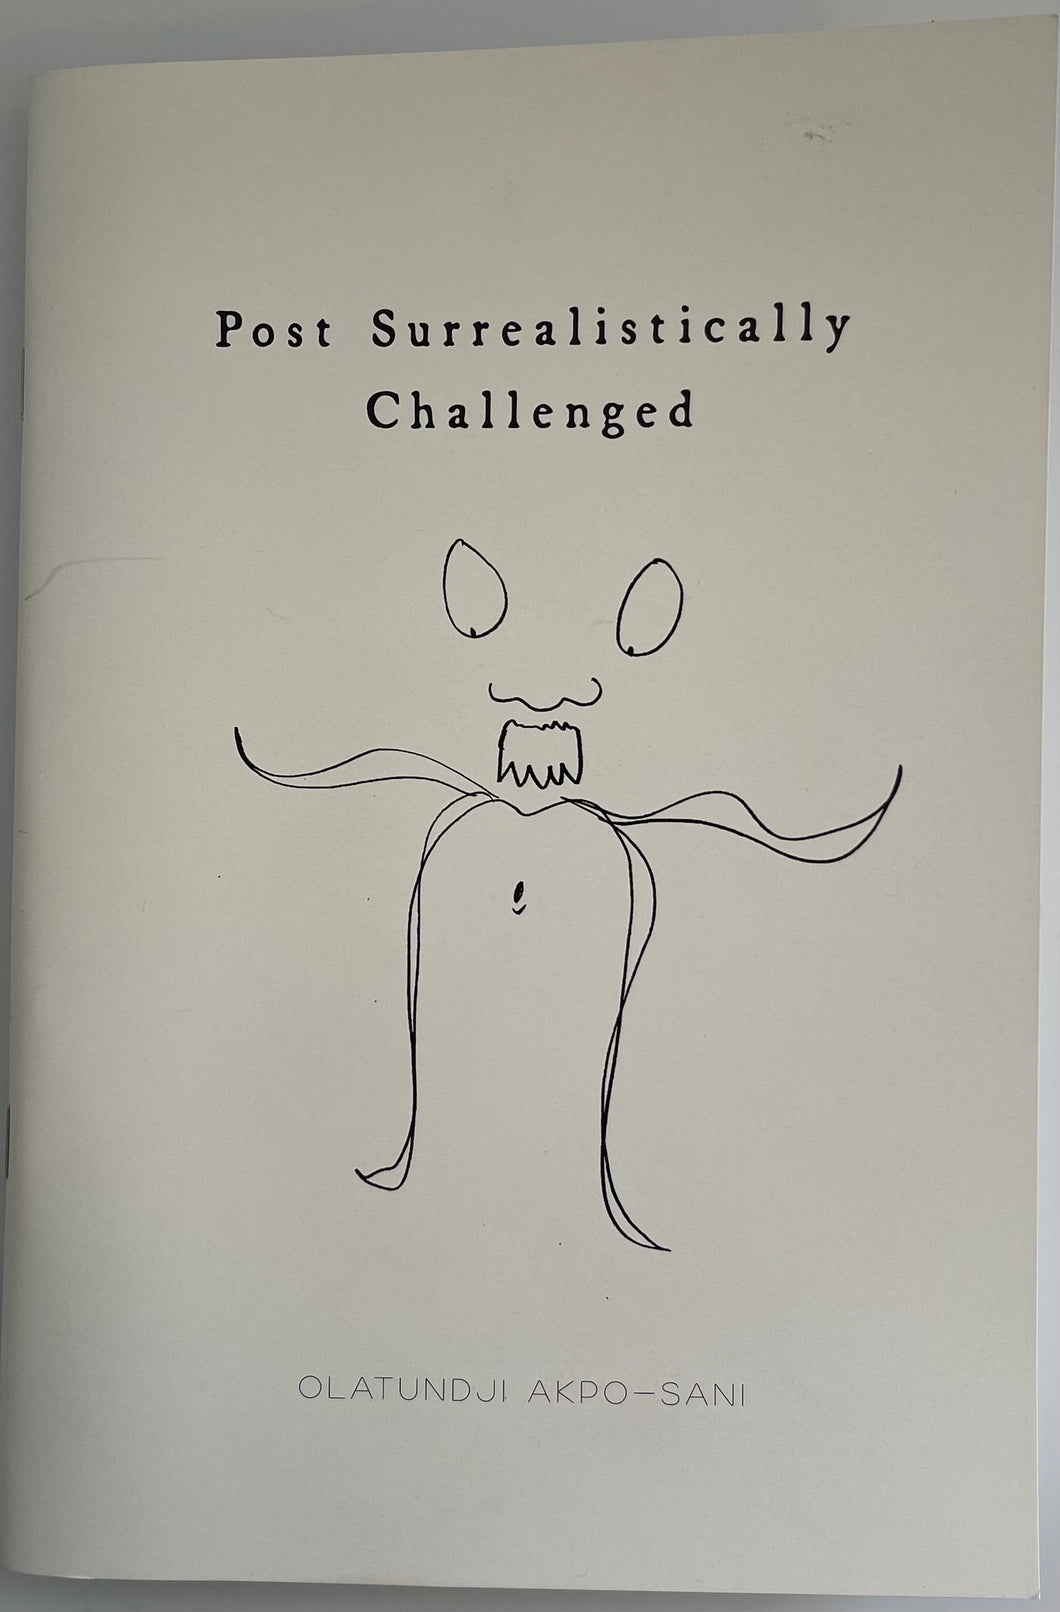 Post Surrealistcally Challenged